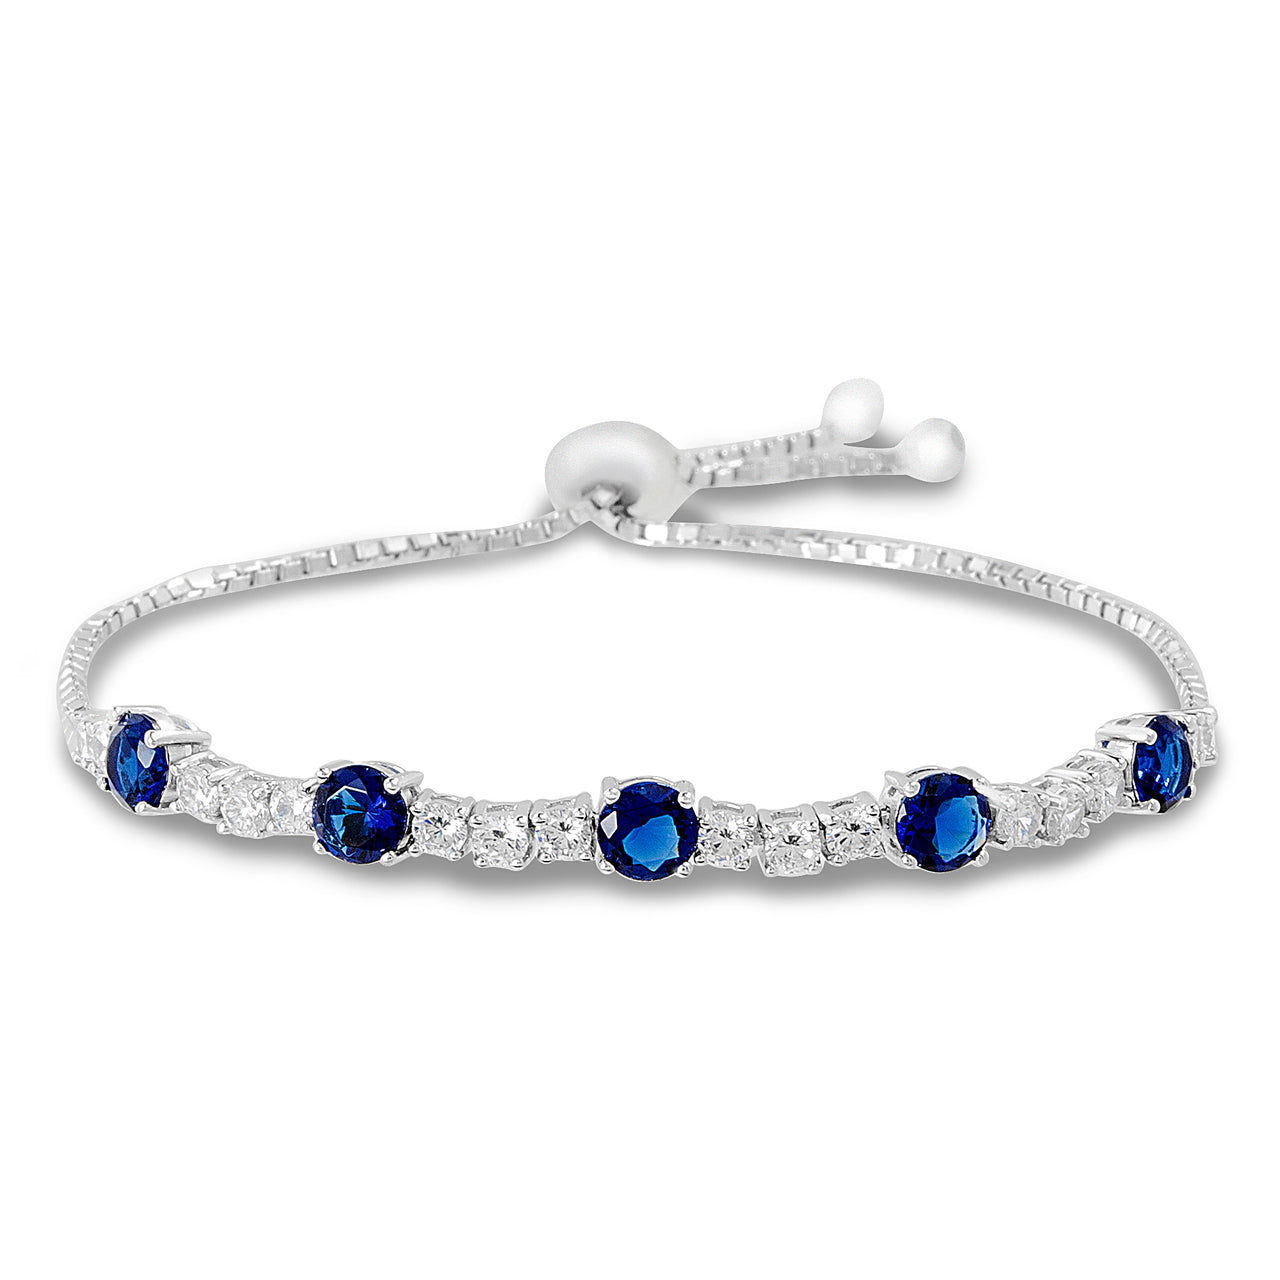 Round Simulated Sapphire and CZ Bridal Gift Adjustable Bolo Tennis Bracelet in Rhodium Plated 925 Sterling Silver 